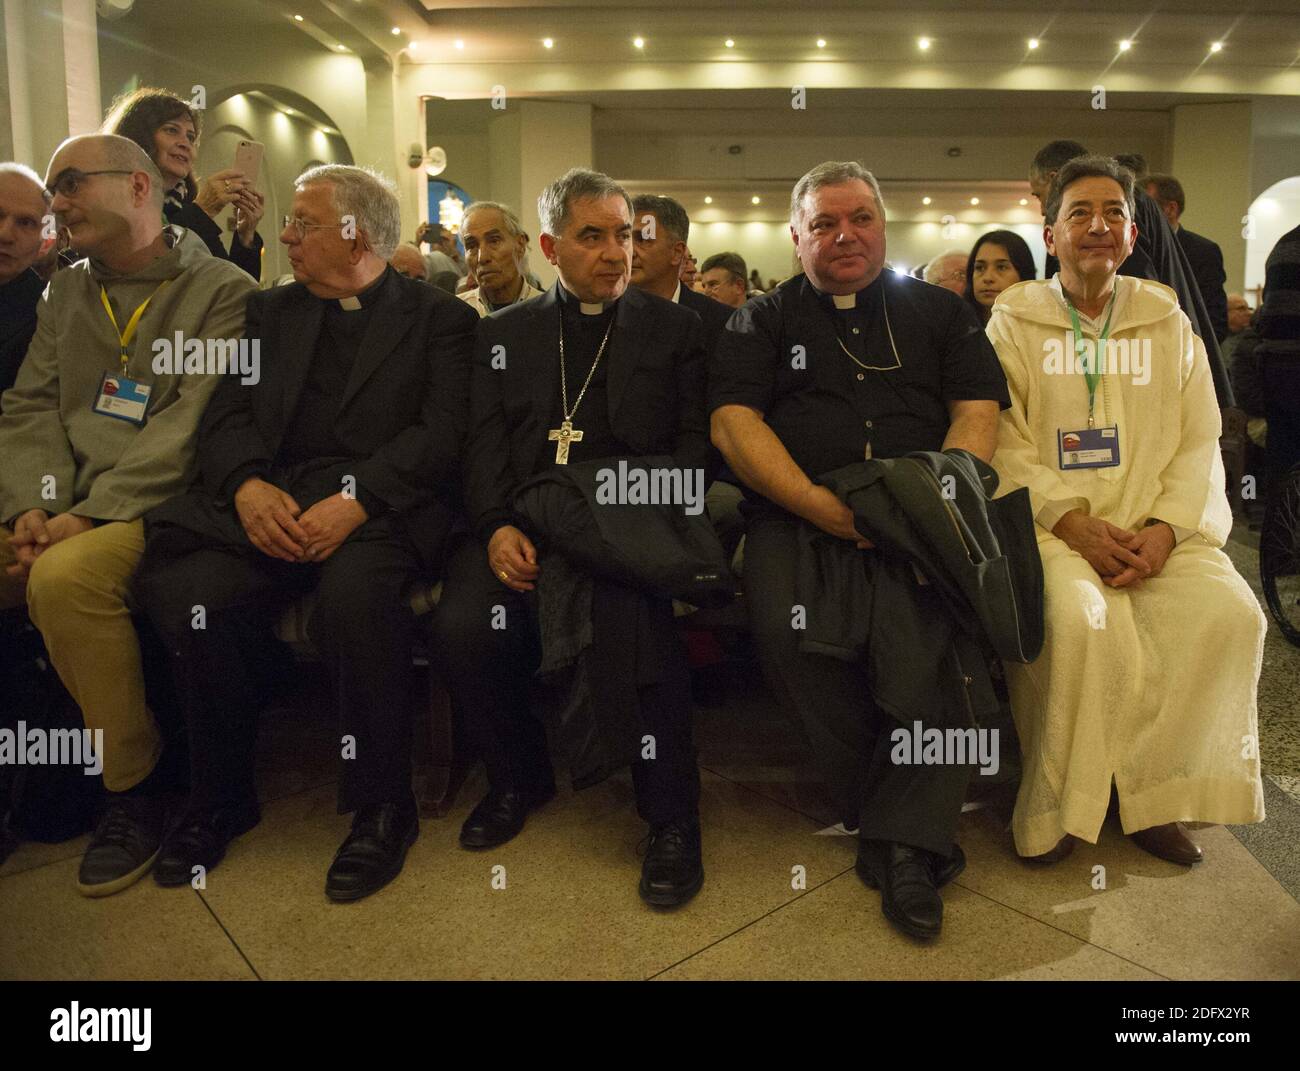 Muslim and catholic officials among faithfuls attend a vigil ahead of Tibhirine (or Tibehirine) monks beatification at Sainte-Marie cathedral in Oran, Algeria on Friday December 7, 2018. On the night of 26–27 March 1996, seven monks of the Trappist order from the Atlas Abbey of Tibhirine near Medea, Algeria were kidnapped during the Algerian Civil War. They were held for two months, and found dead in late May 1996. The circumstances of their kidnapping and death remain controversial; the Armed Islamic Group (Groupe Islamique Arme, GIA) claimed responsibility for both, but in 2009, retired Gene Stock Photo